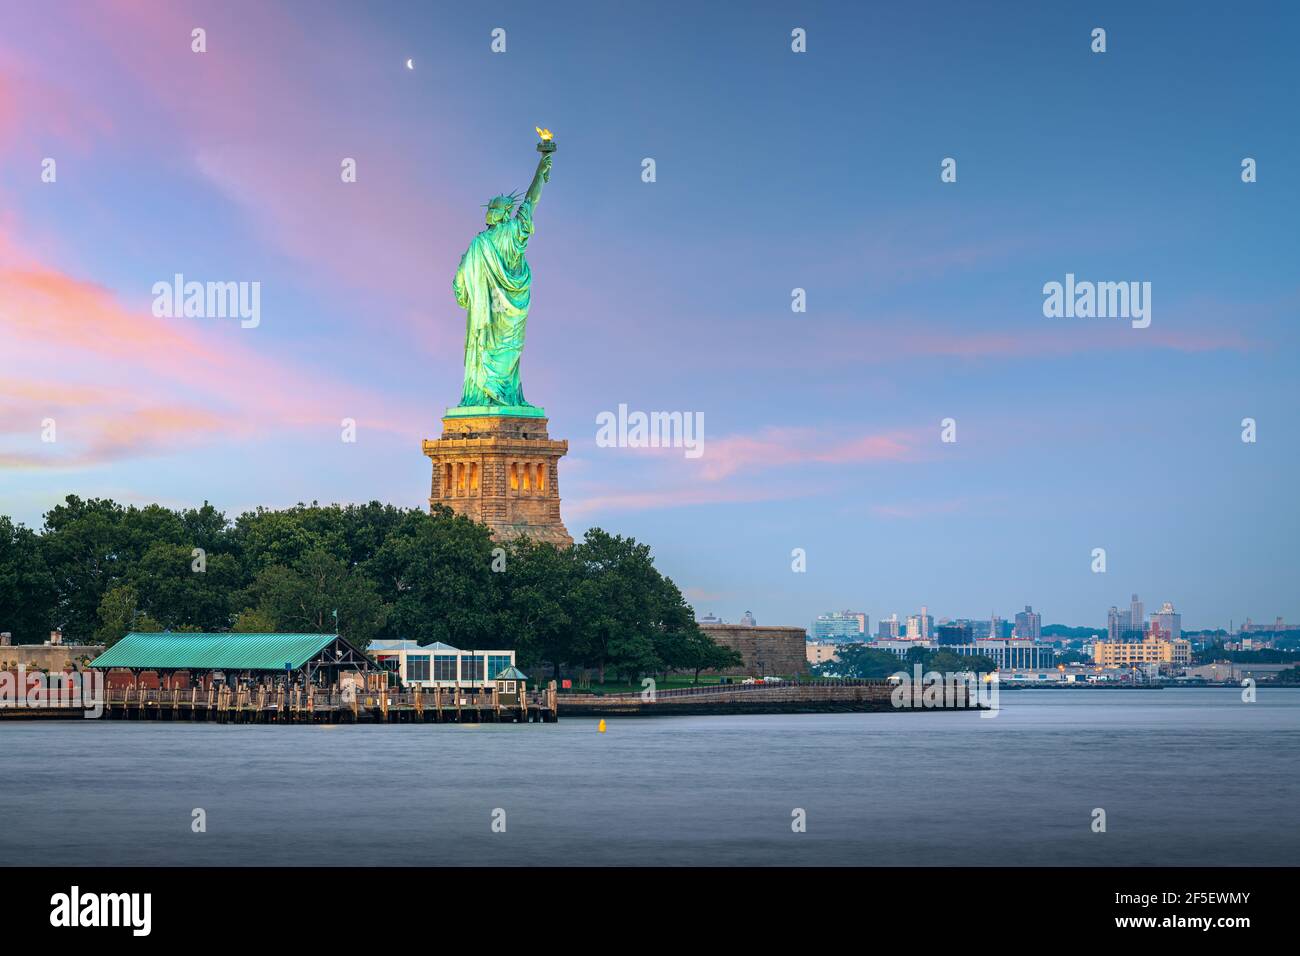 Statue of Liberty in New York Harbor at dusk. Stock Photo